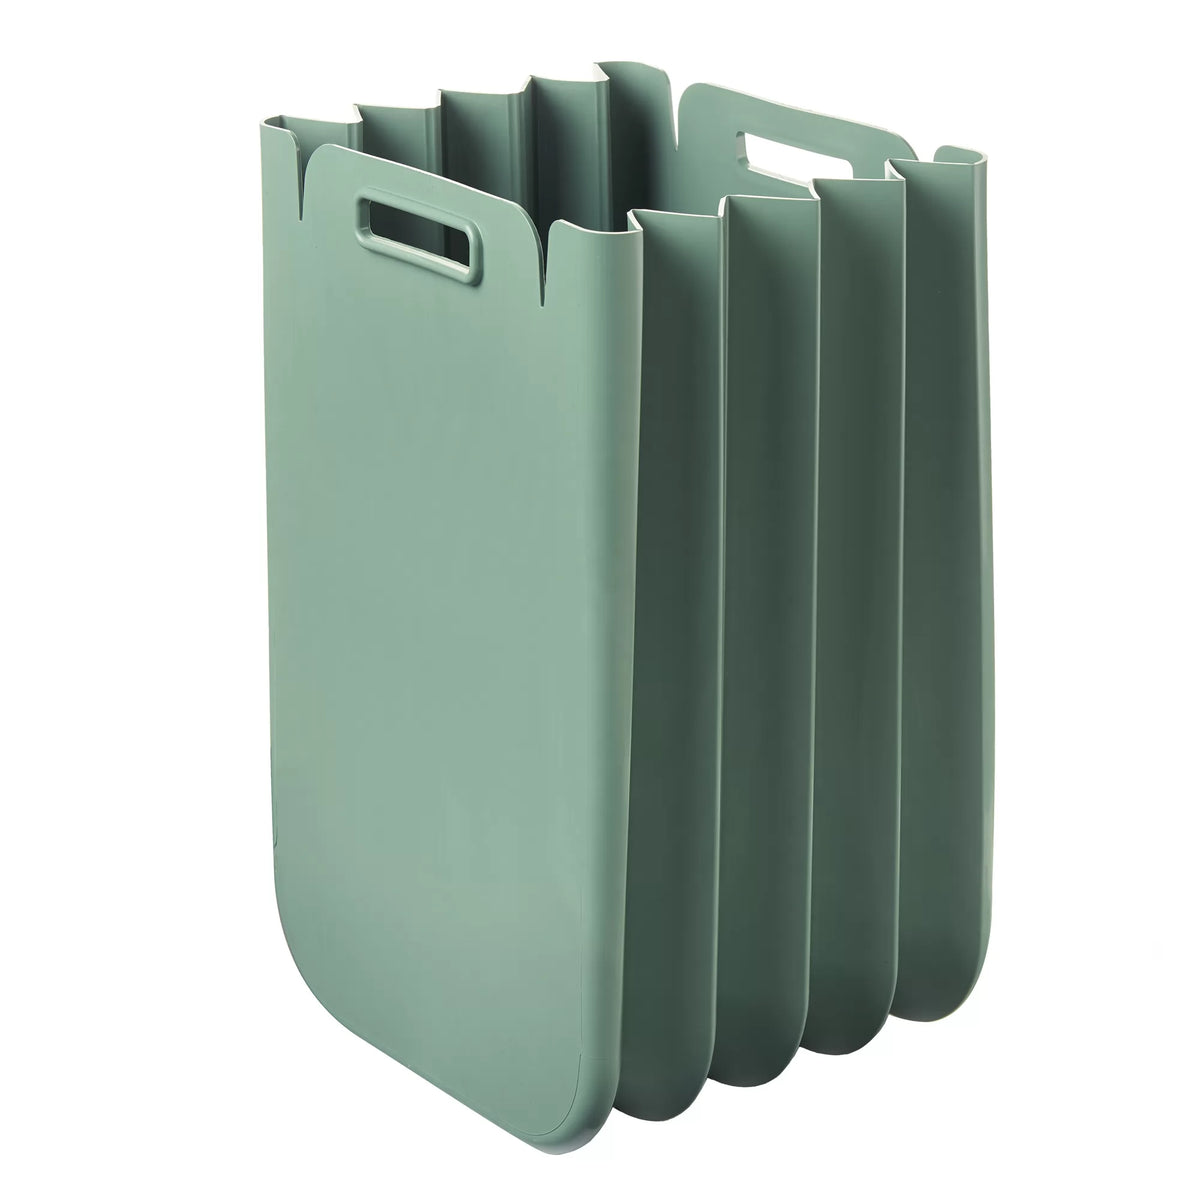 Eco Packly Multipurpose Recycling Bin in Sage Green - 25L - Notbrand